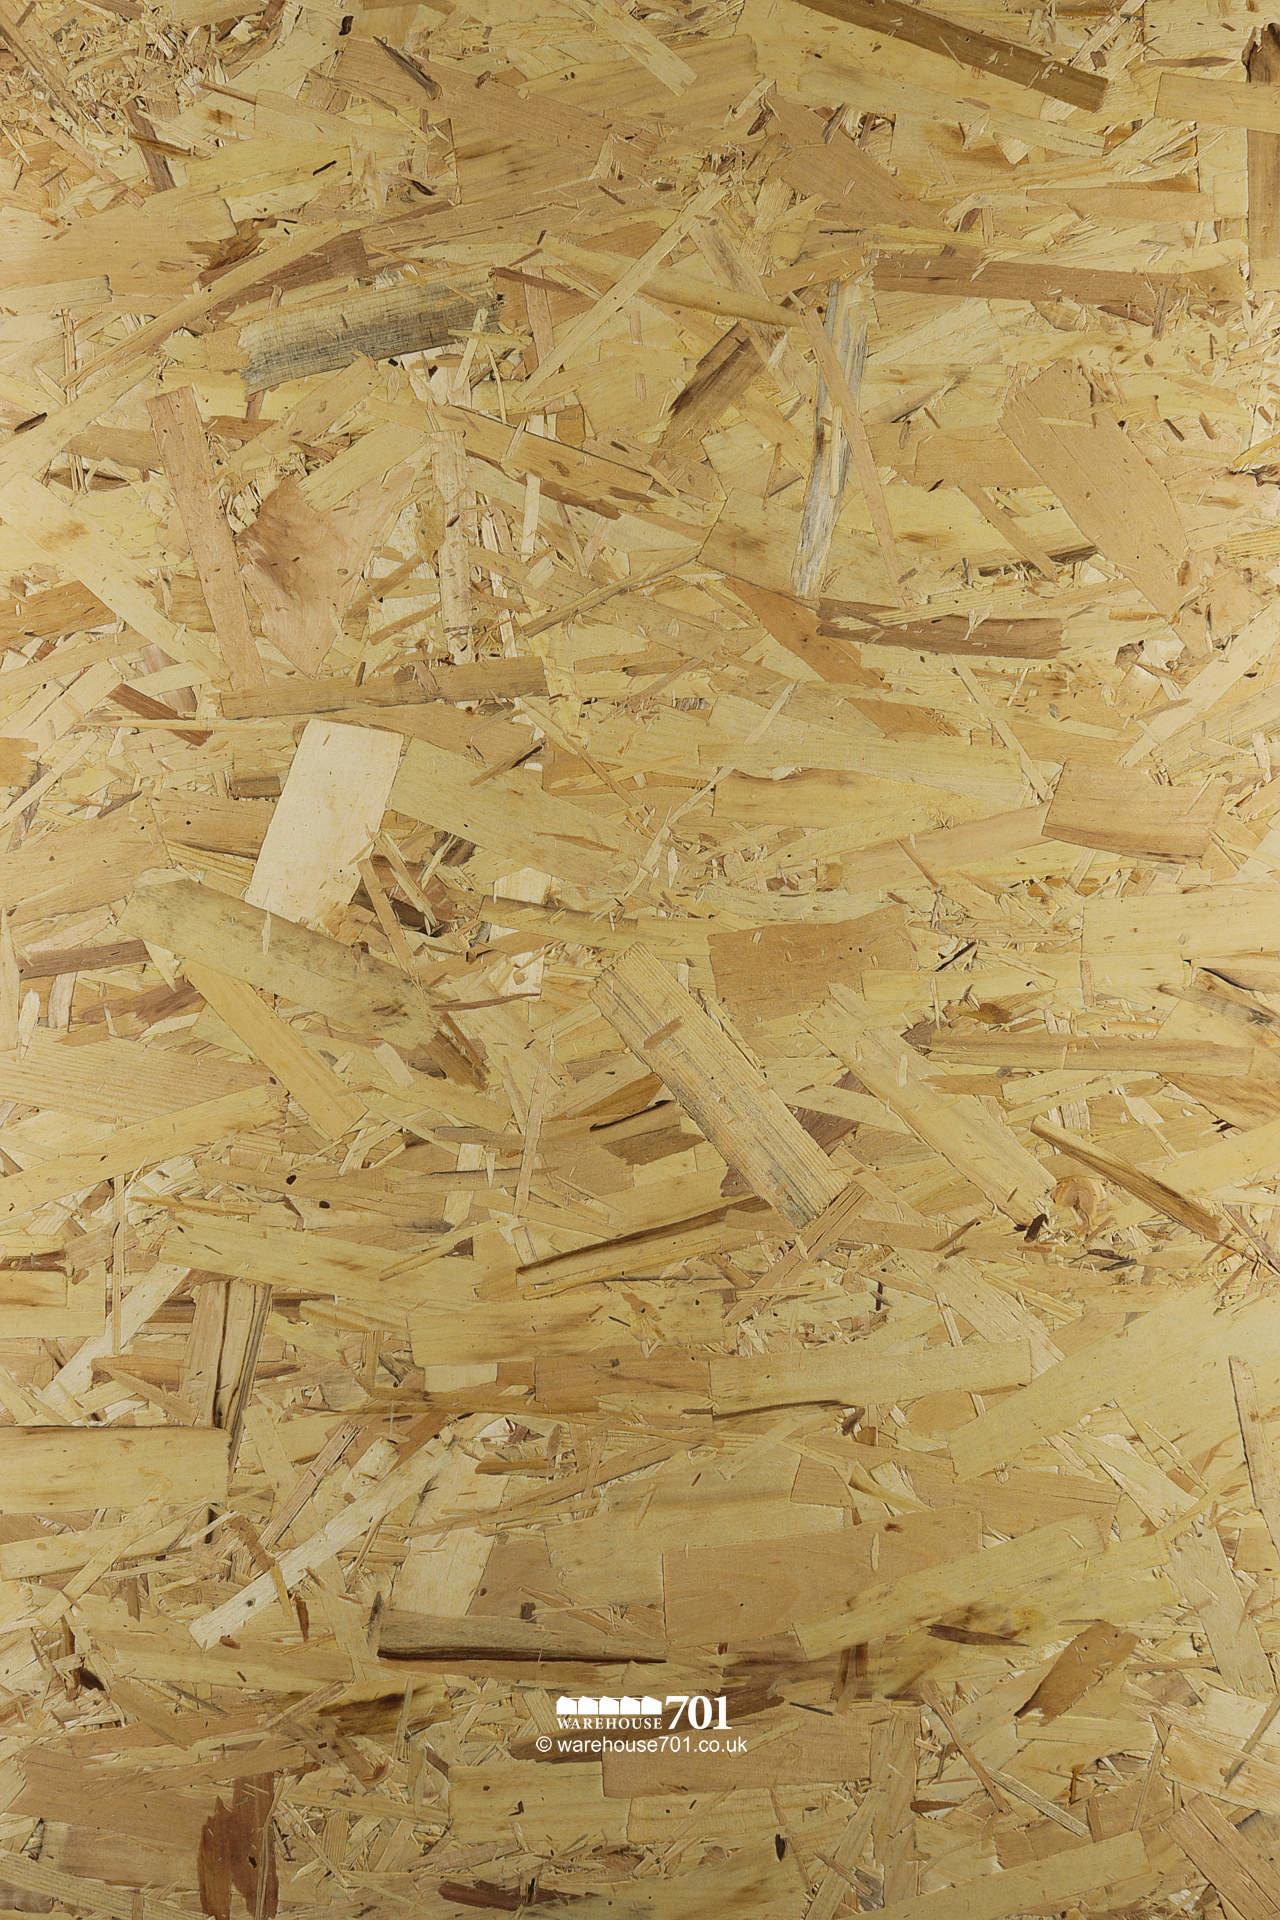 NEW Kronospan® OSB3 (Oriented Strand Board) or Sterling board for construction and DIY #2